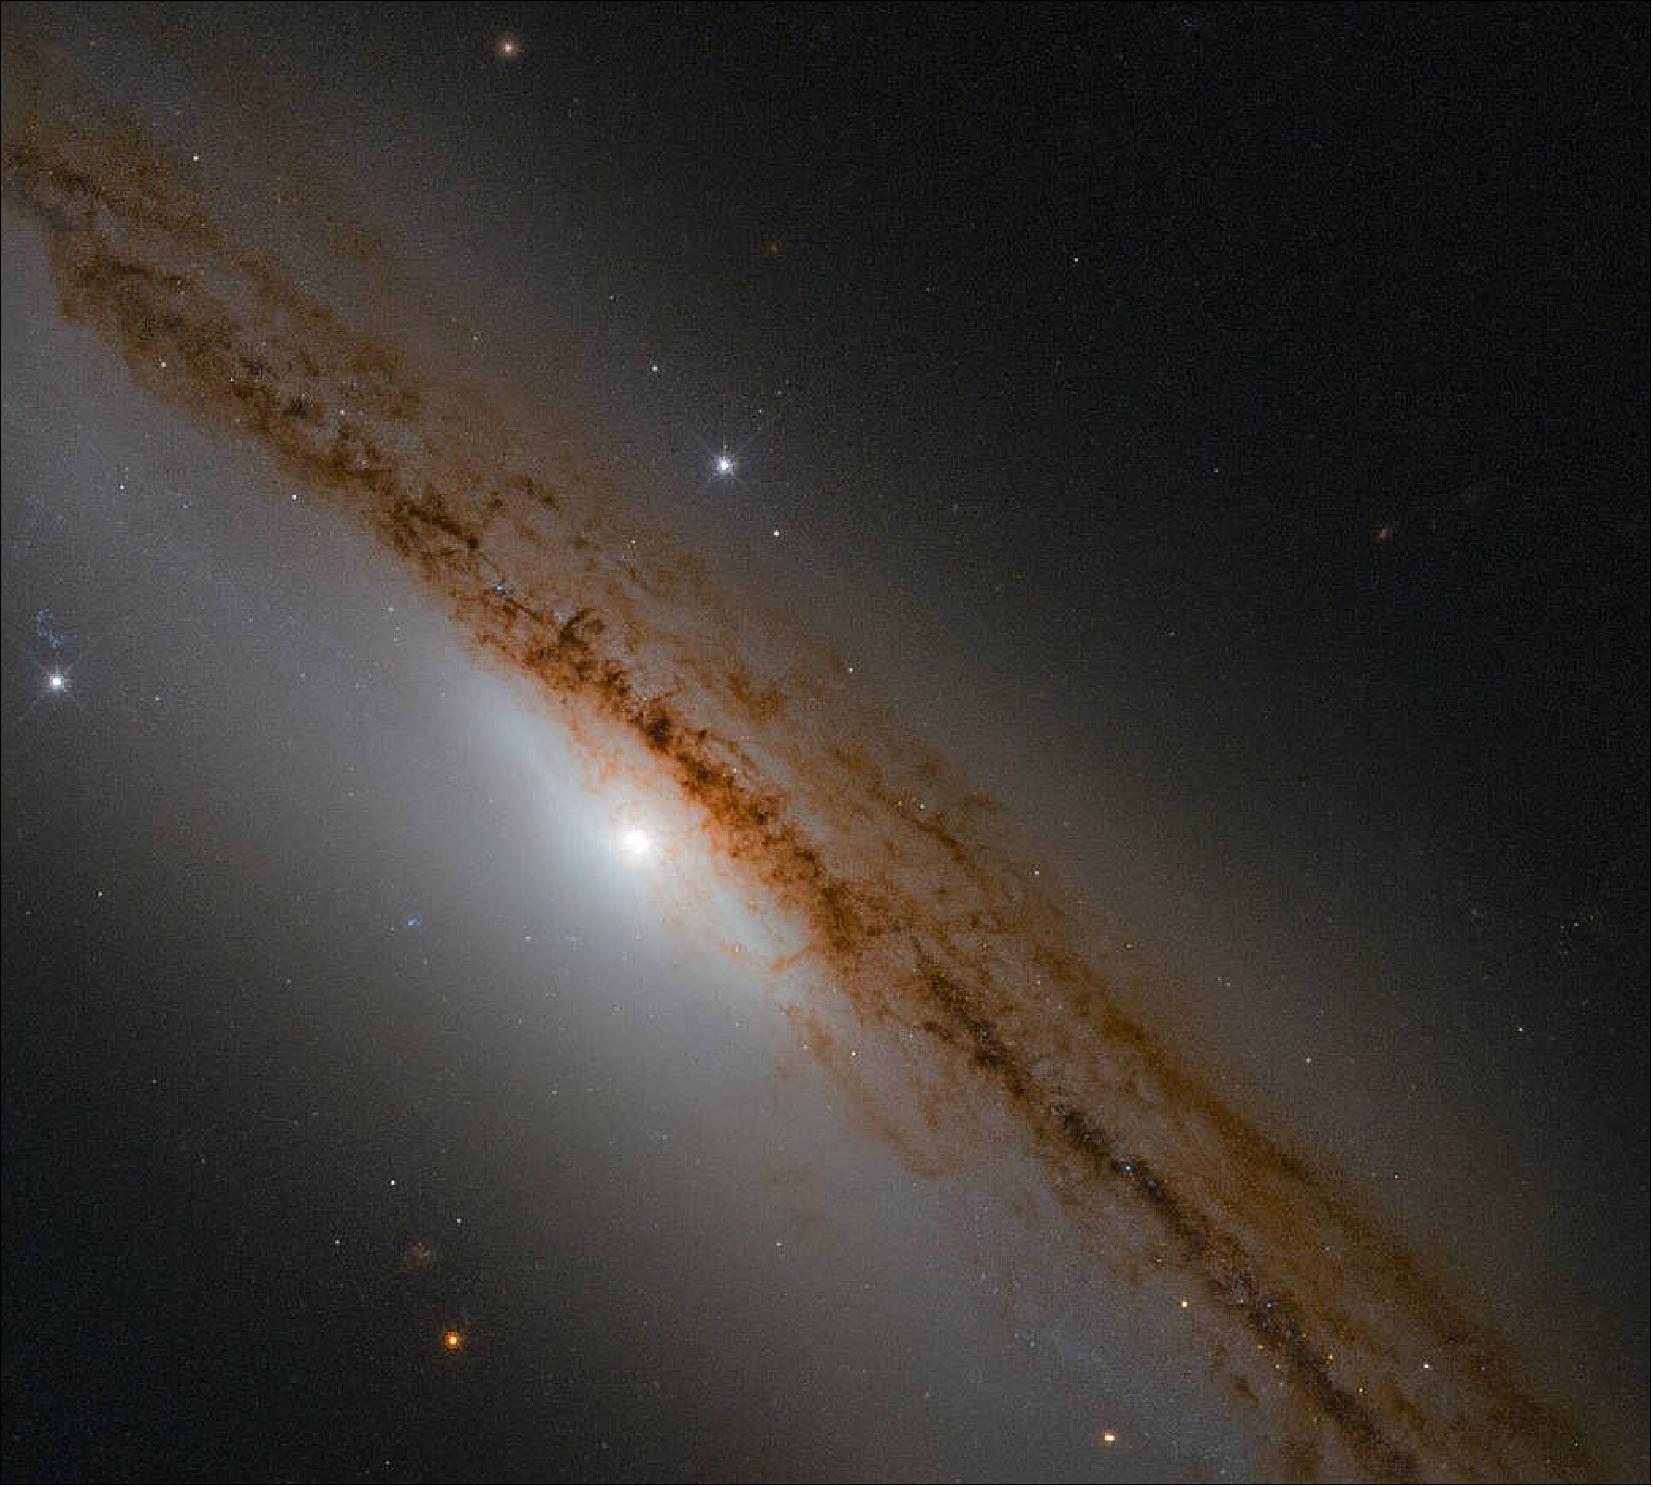 Figure 87: The subject of this image taken by the NASA/ESA Hubble Space Telescope, a spiral galaxy named NGC 1589, was once the scene of a violent bout of cosmic hunger pangs. As astronomers looked on, a poor, hapless star was seemingly torn apart and devoured by the ravenous supermassive black hole at the center of the galaxy (image credit: ESA/Hubble & NASA; CC BY 4.0)